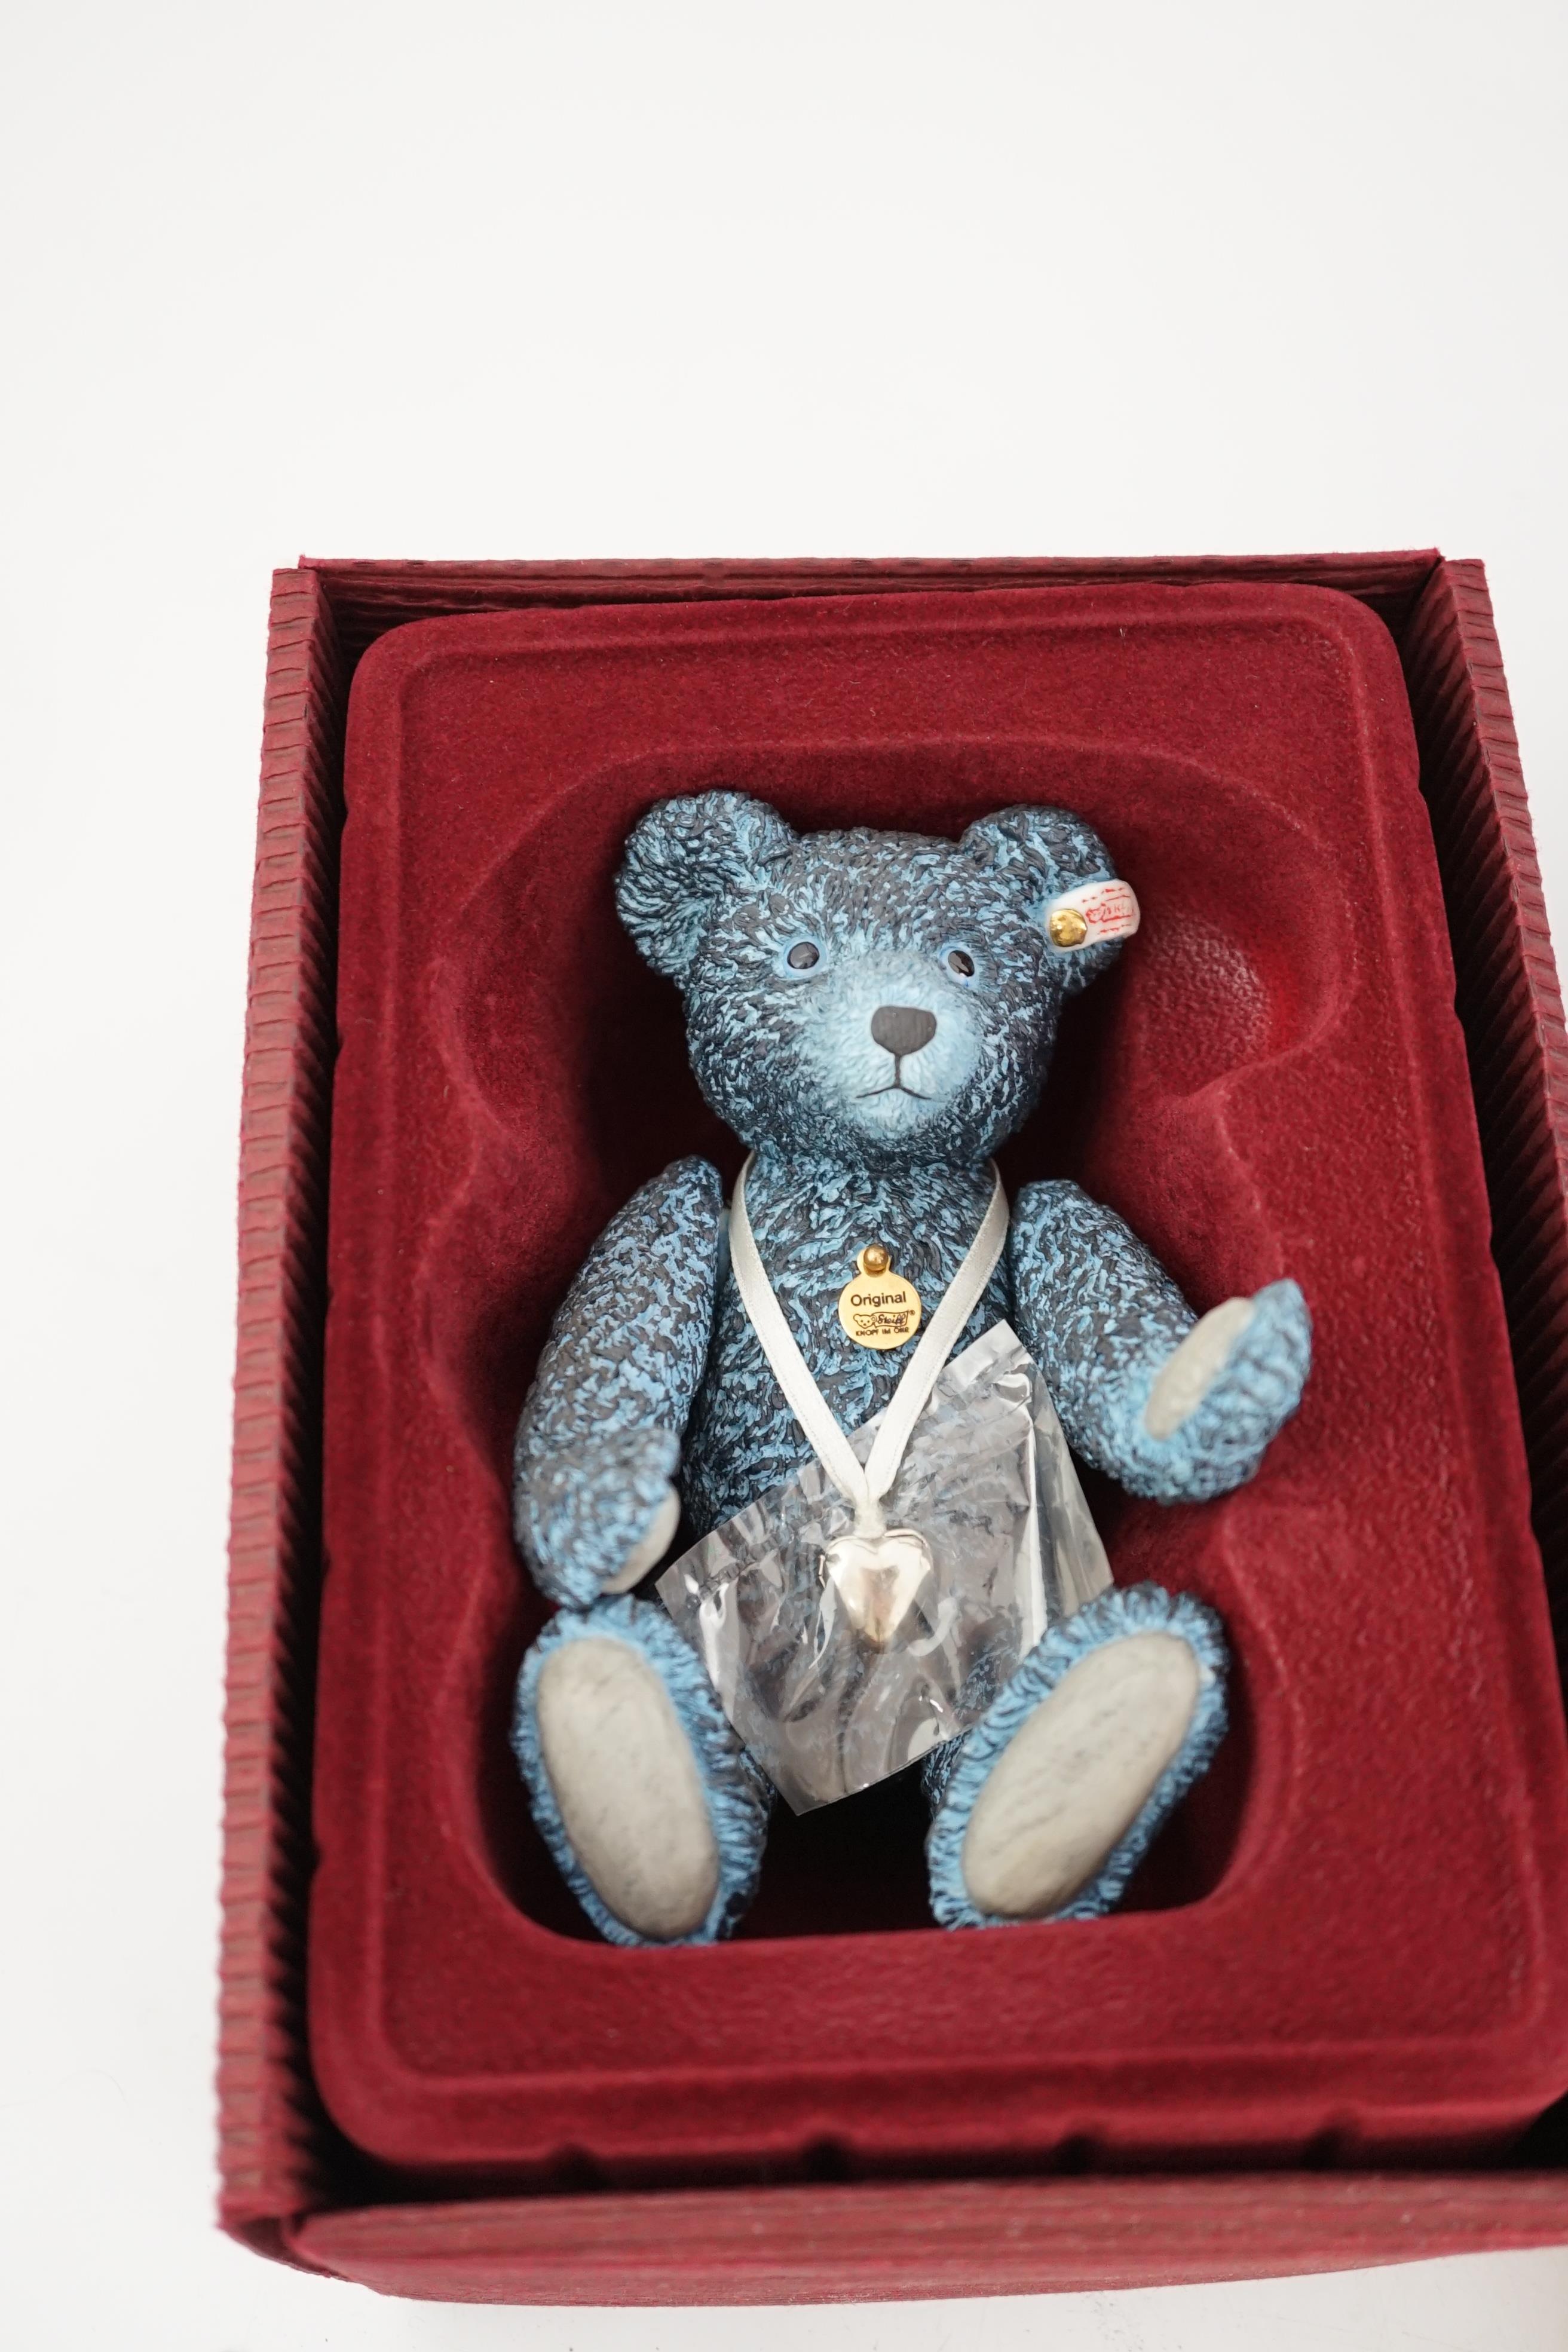 An early Paddington bear, blue jacket, missing hat, a Steiff Ltd. edition lilac bear in box, and a porcelain Pelham puppet in box, good condition